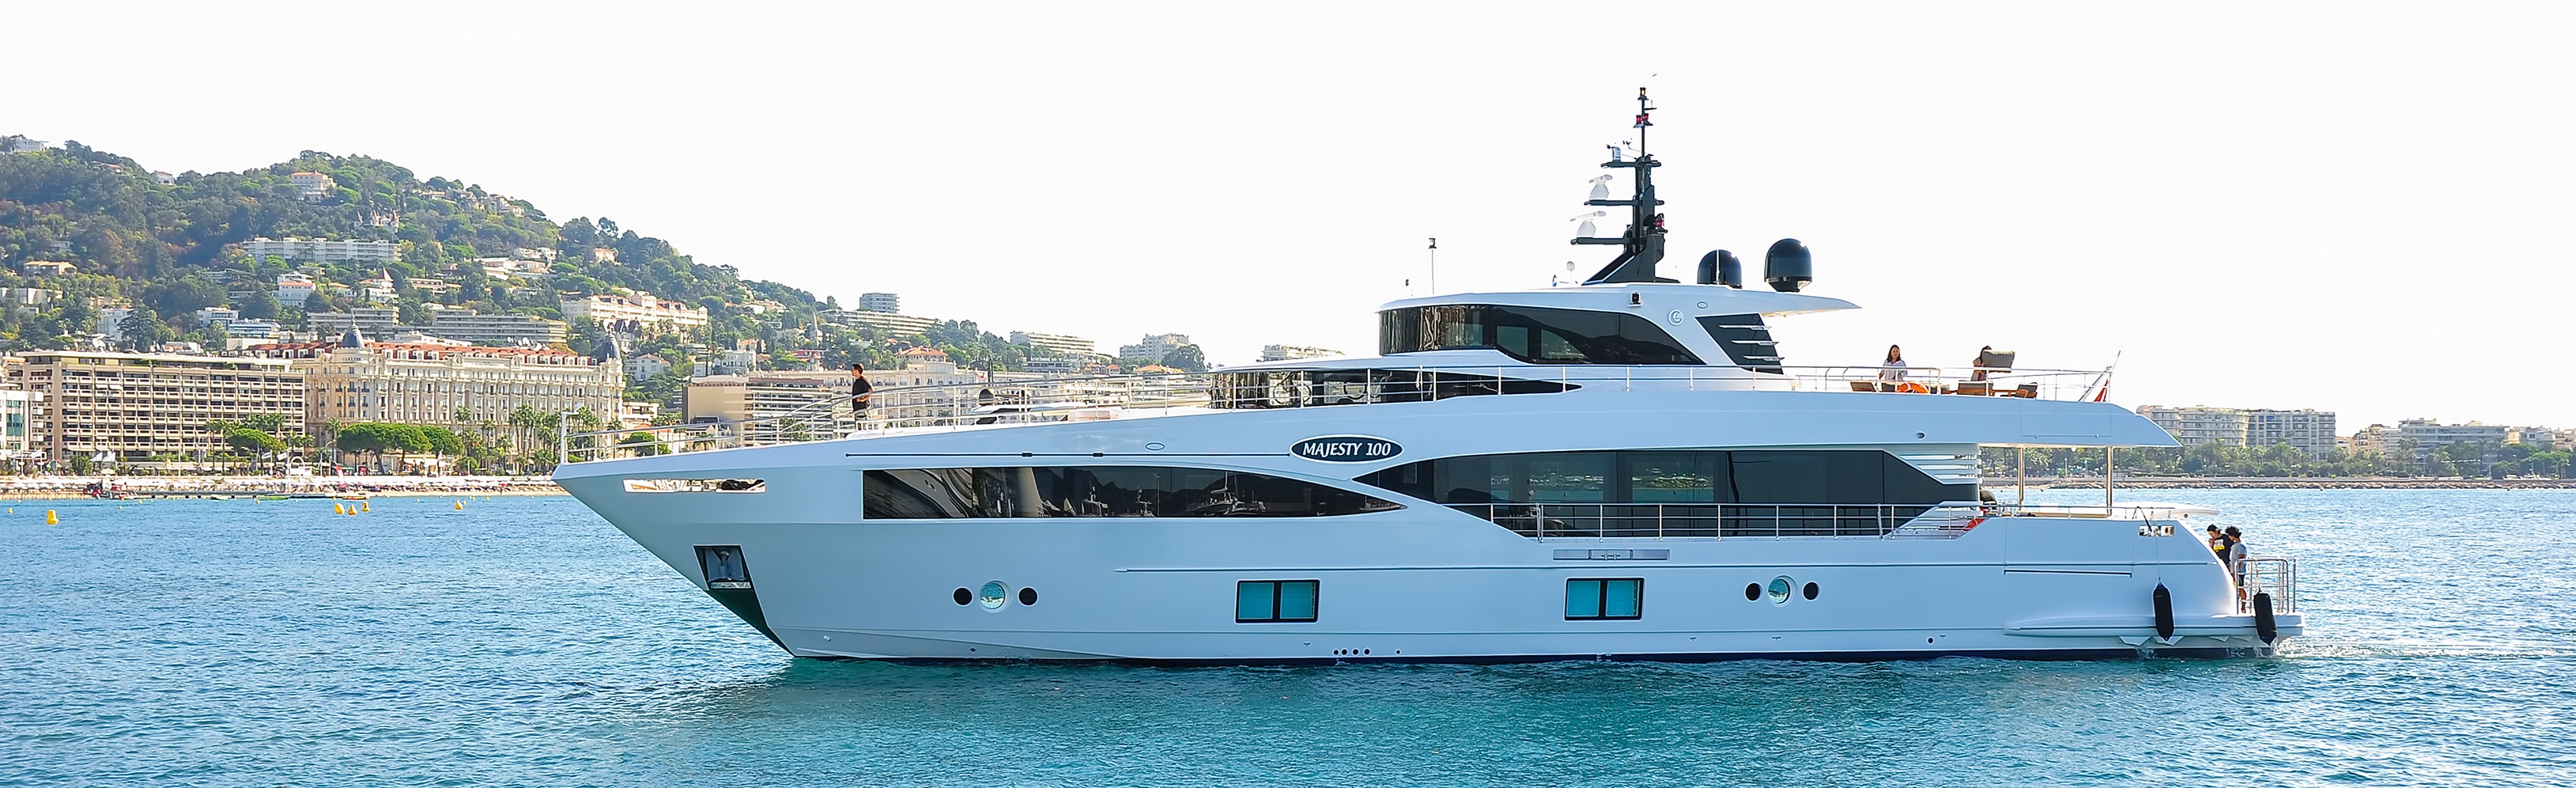 Majesty-100-as-it-enters-Cannes-Yachting-Festival